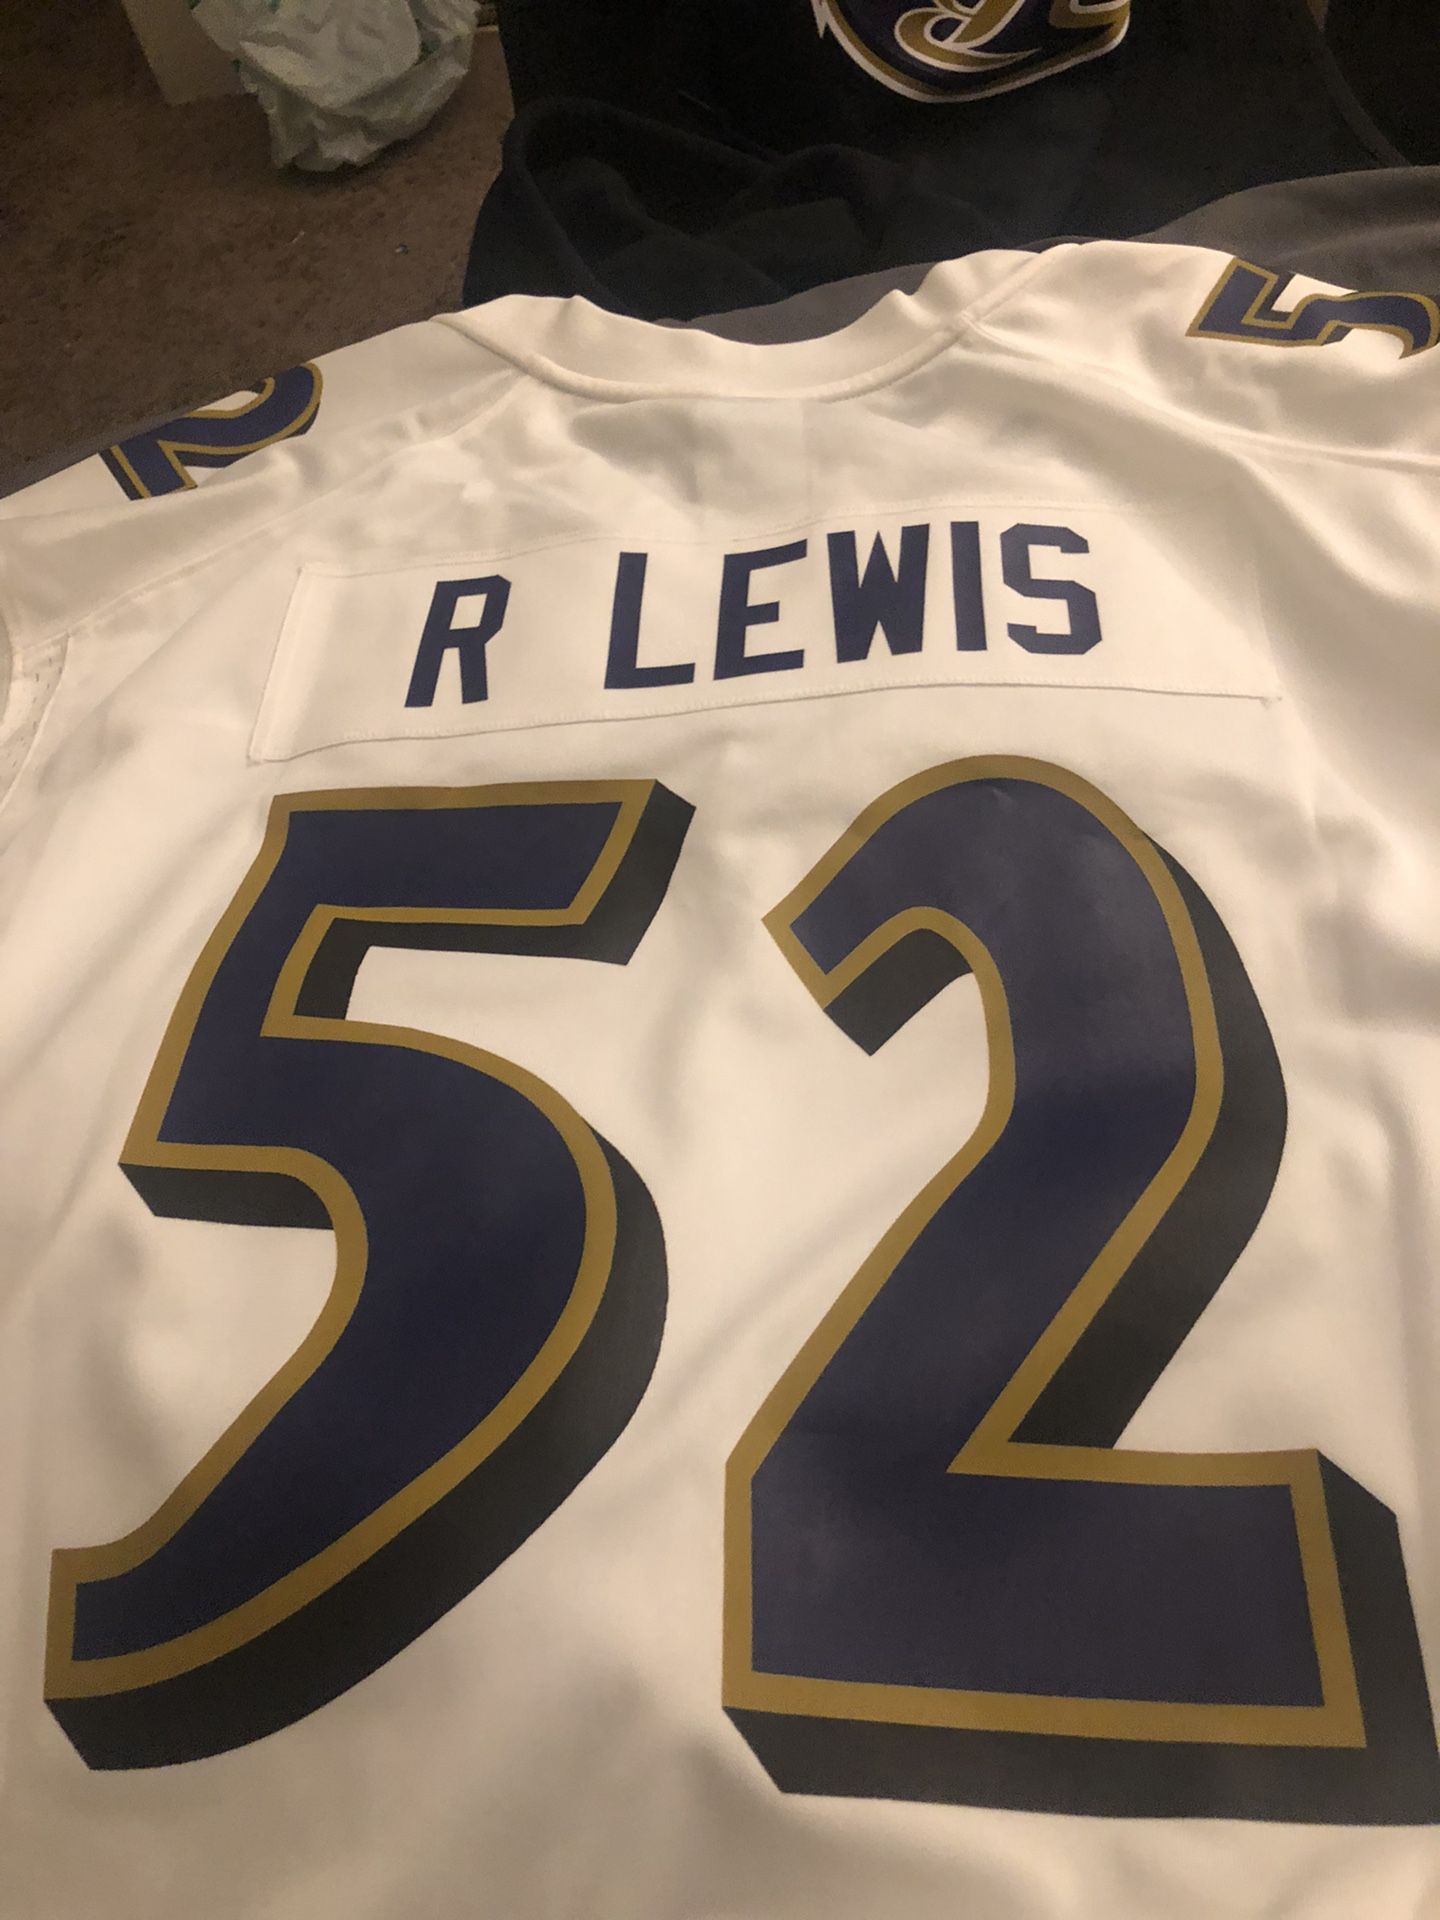 ray lewis jersey